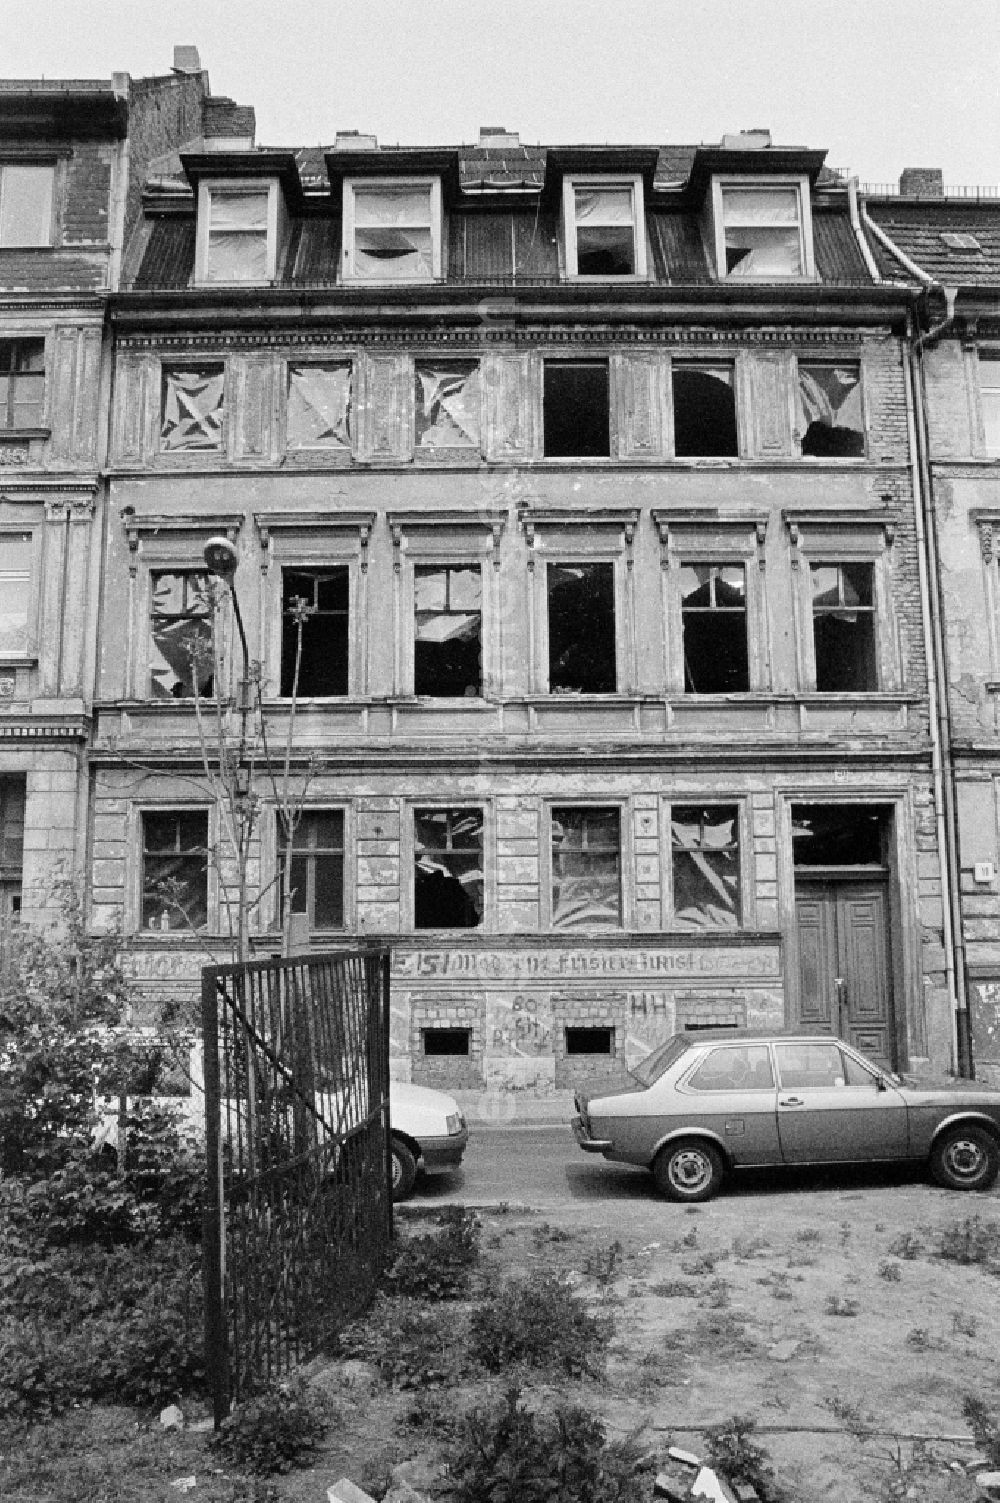 GDR picture archive: Berlin - Ruins Remainder of the facade with old advertising inscriptions and roof structure of an apartment building in the Scheunenviertel on Steinstrasse in Berlin East Berlin in the area of the former GDR, German Democratic Republic